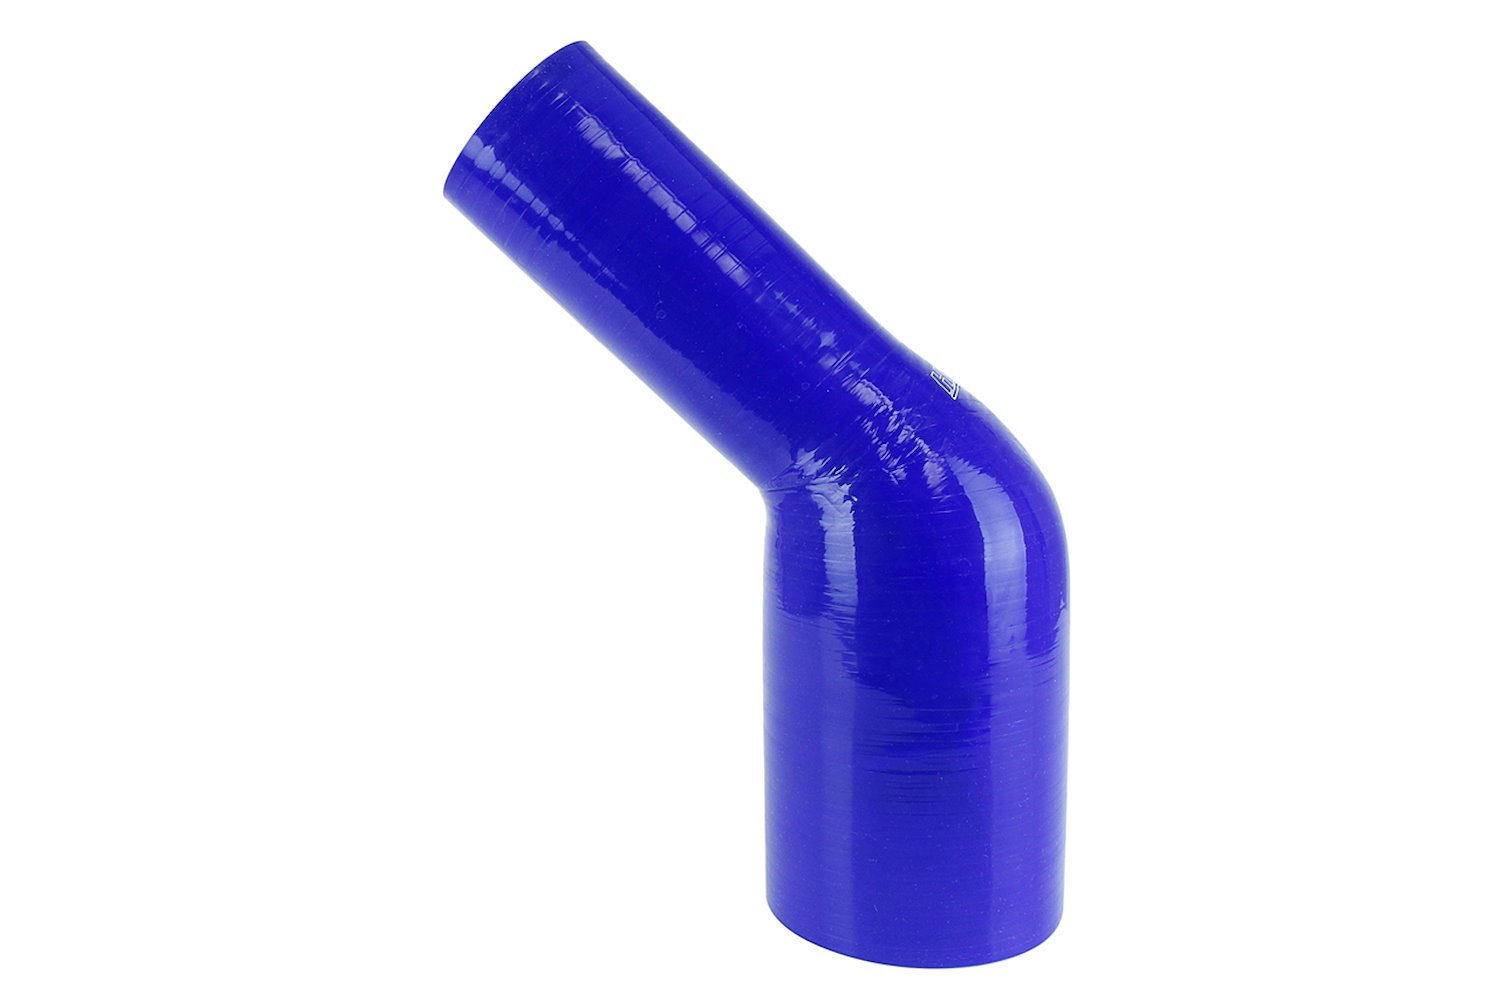 HTSER45-200-275-BLUE Silicone 45-Degree Elbow Hose, High-Temp 4-Ply Reinforced, 2 in. - 2-3/4 in. ID, Blue